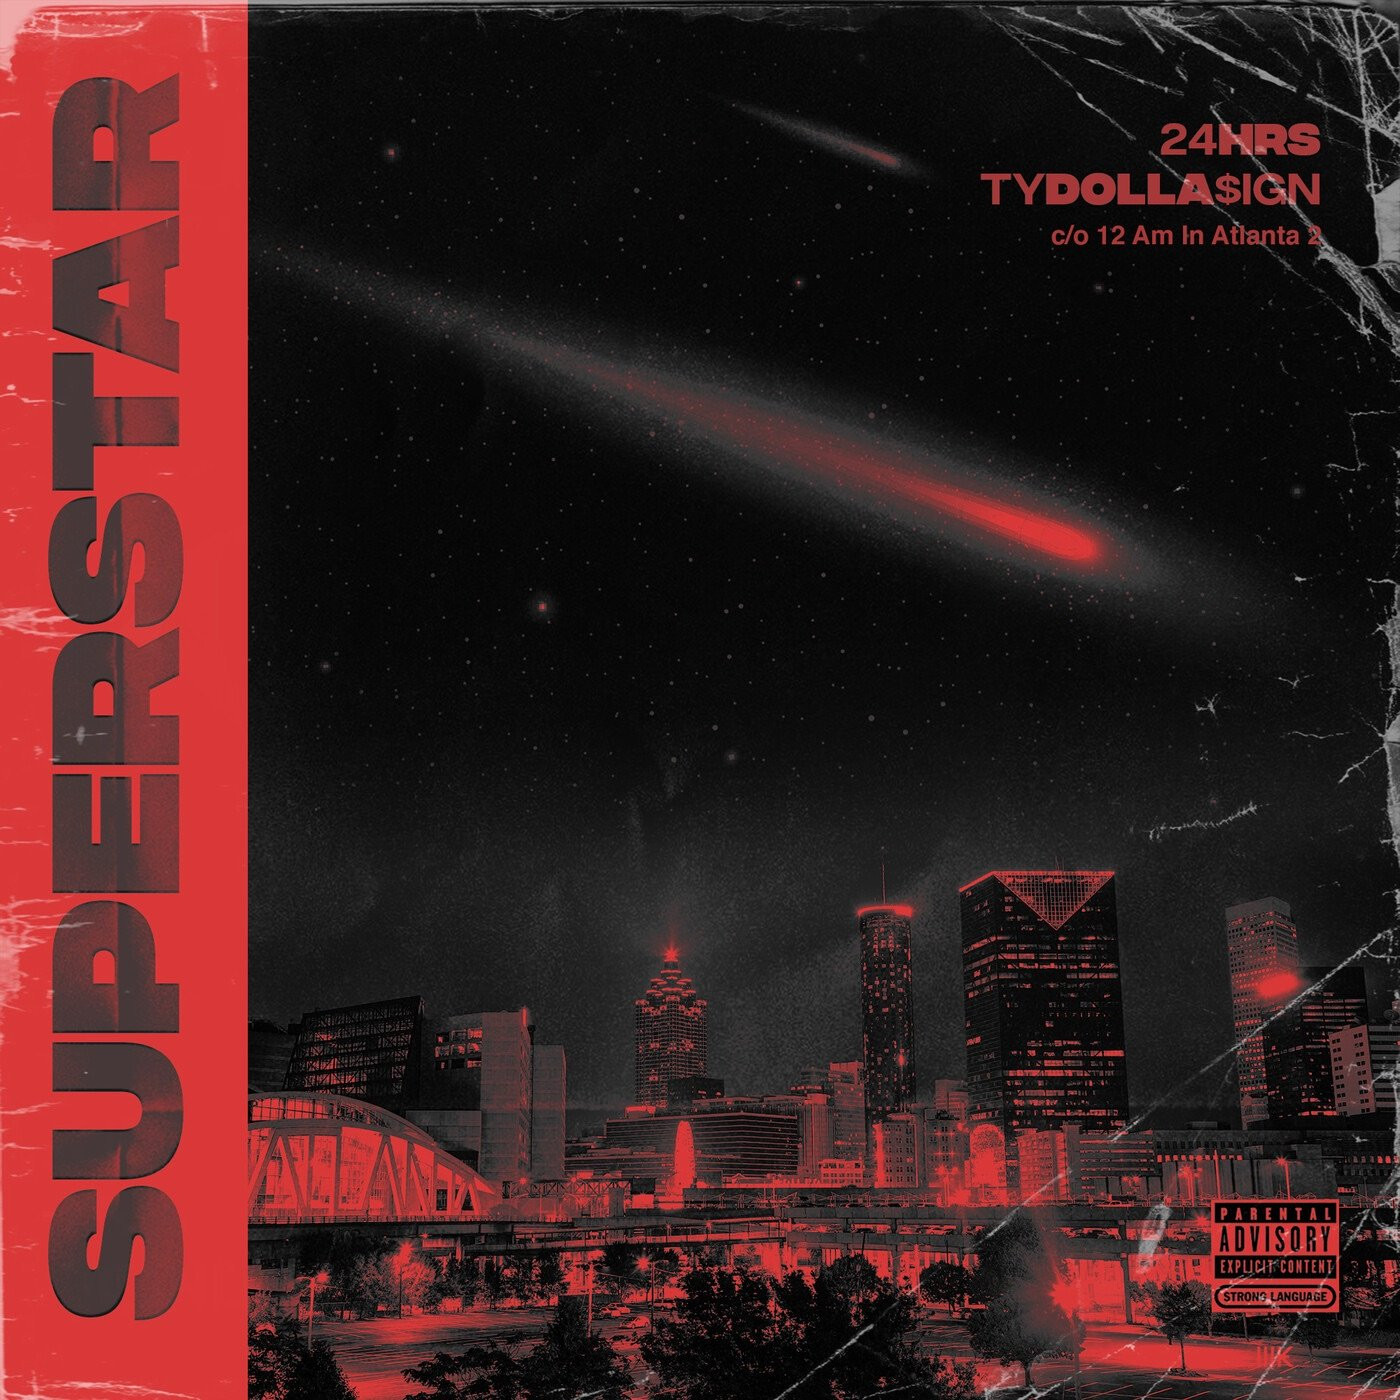 24hrs & Ty Dolla $ign Talk That Talk On Melodic Single “Superstar”